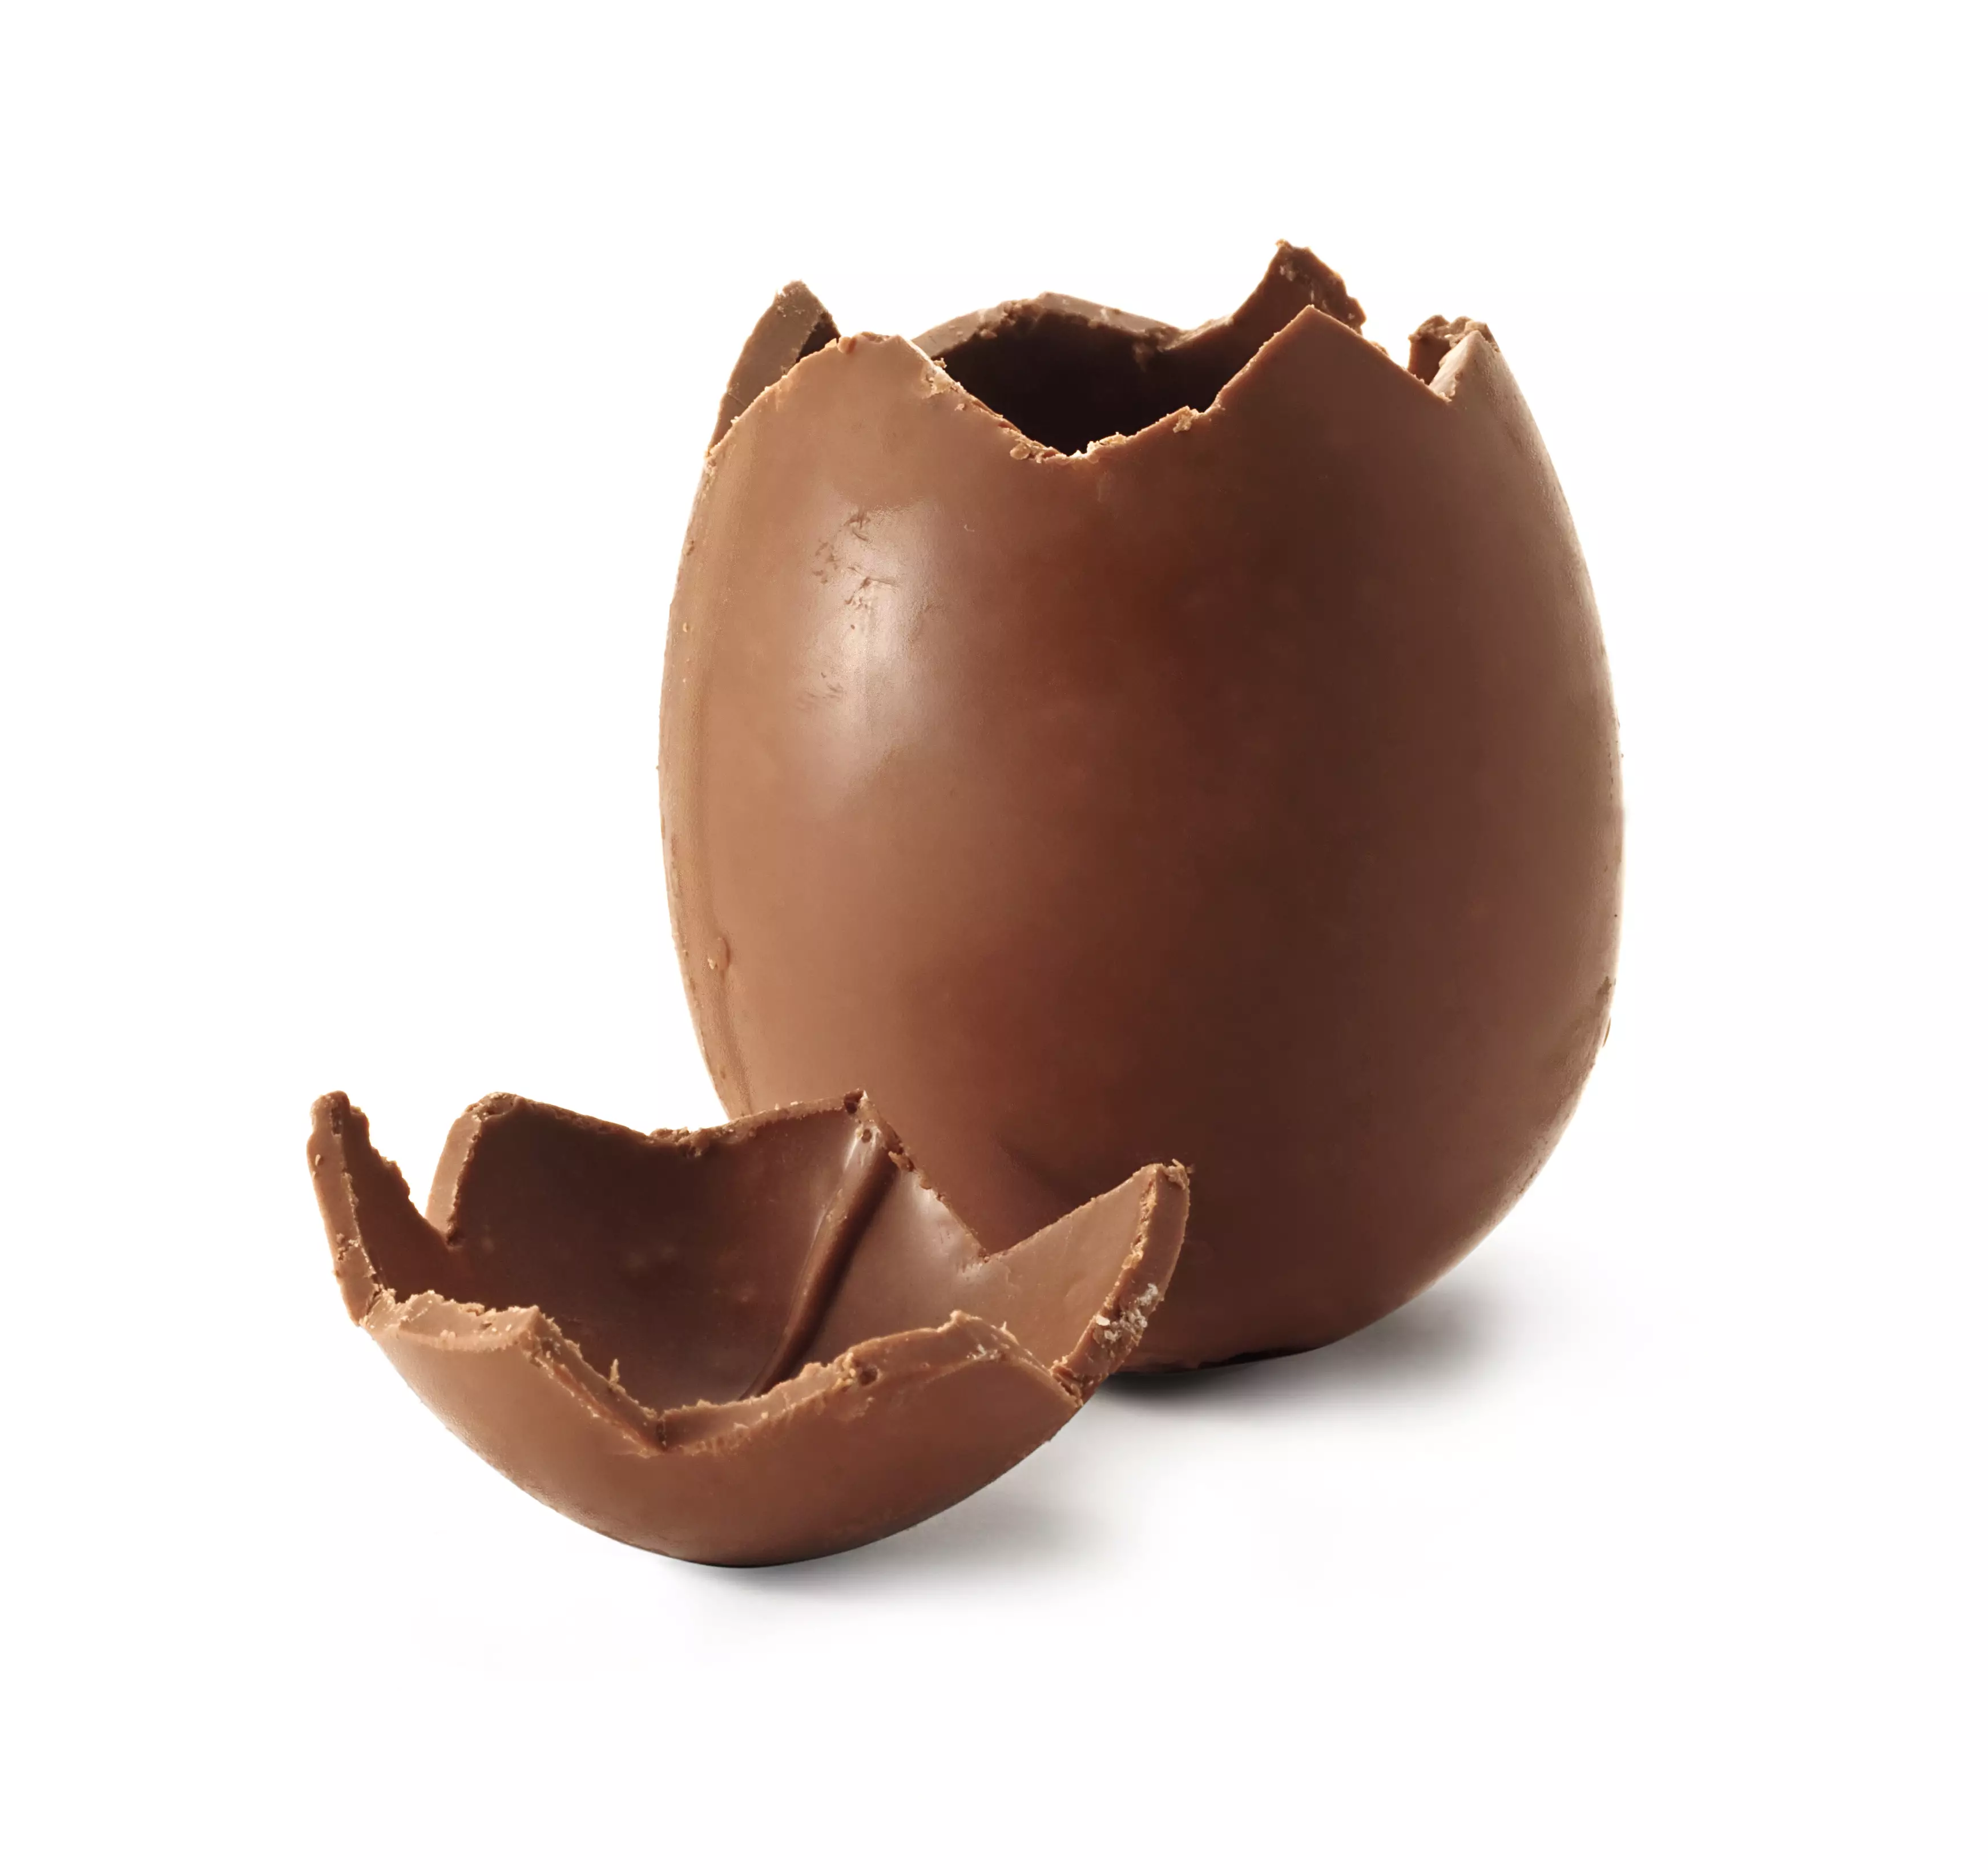 Vets think Bailey ate about half of a milk chocolate Easter egg (